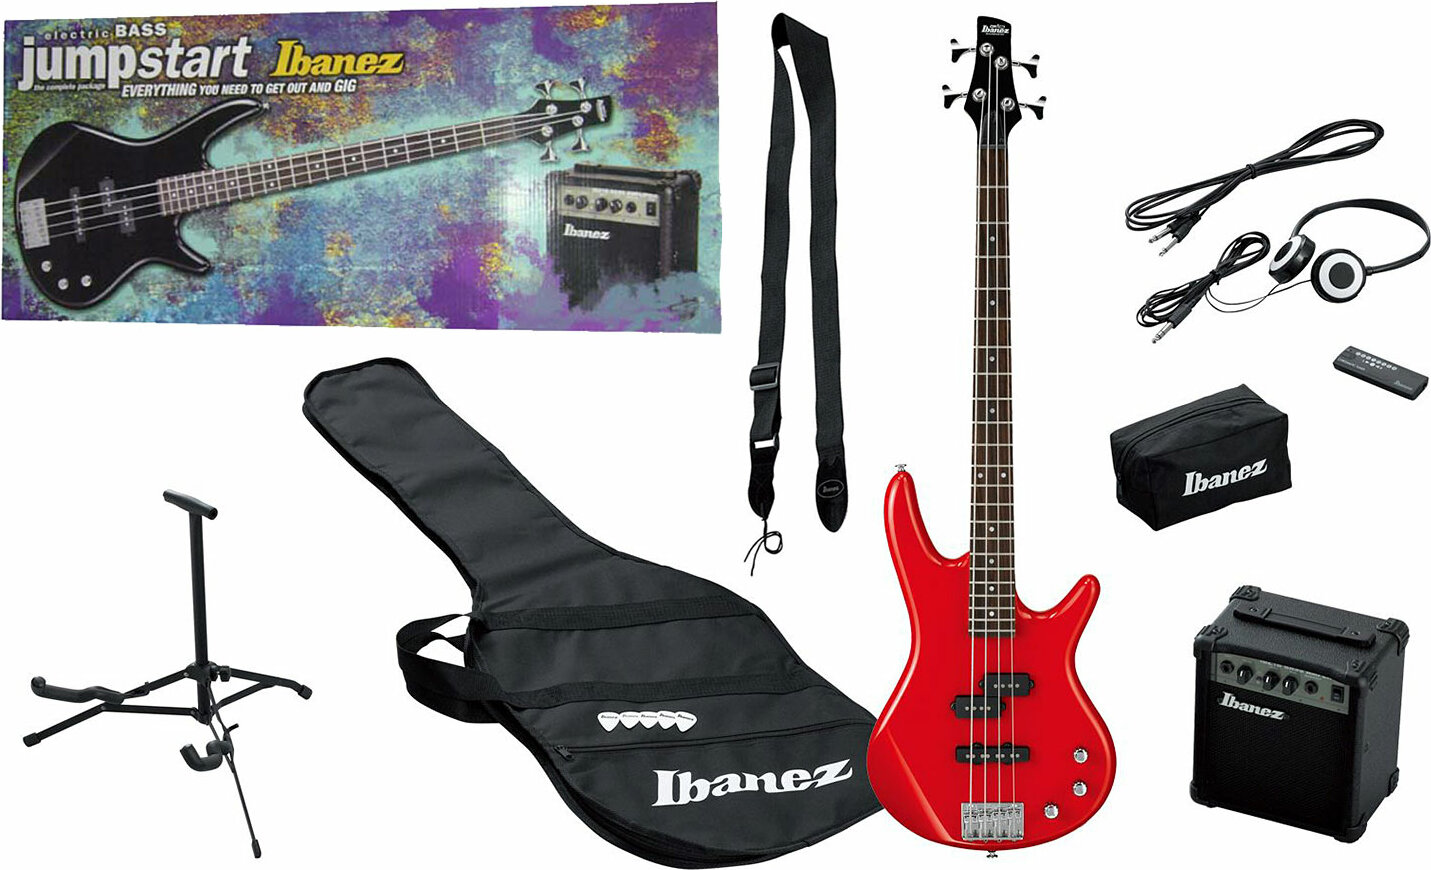 Ibanez Ijsr190 Rd Jumpstart Guitar Package - Red - Electric bass set - Main picture